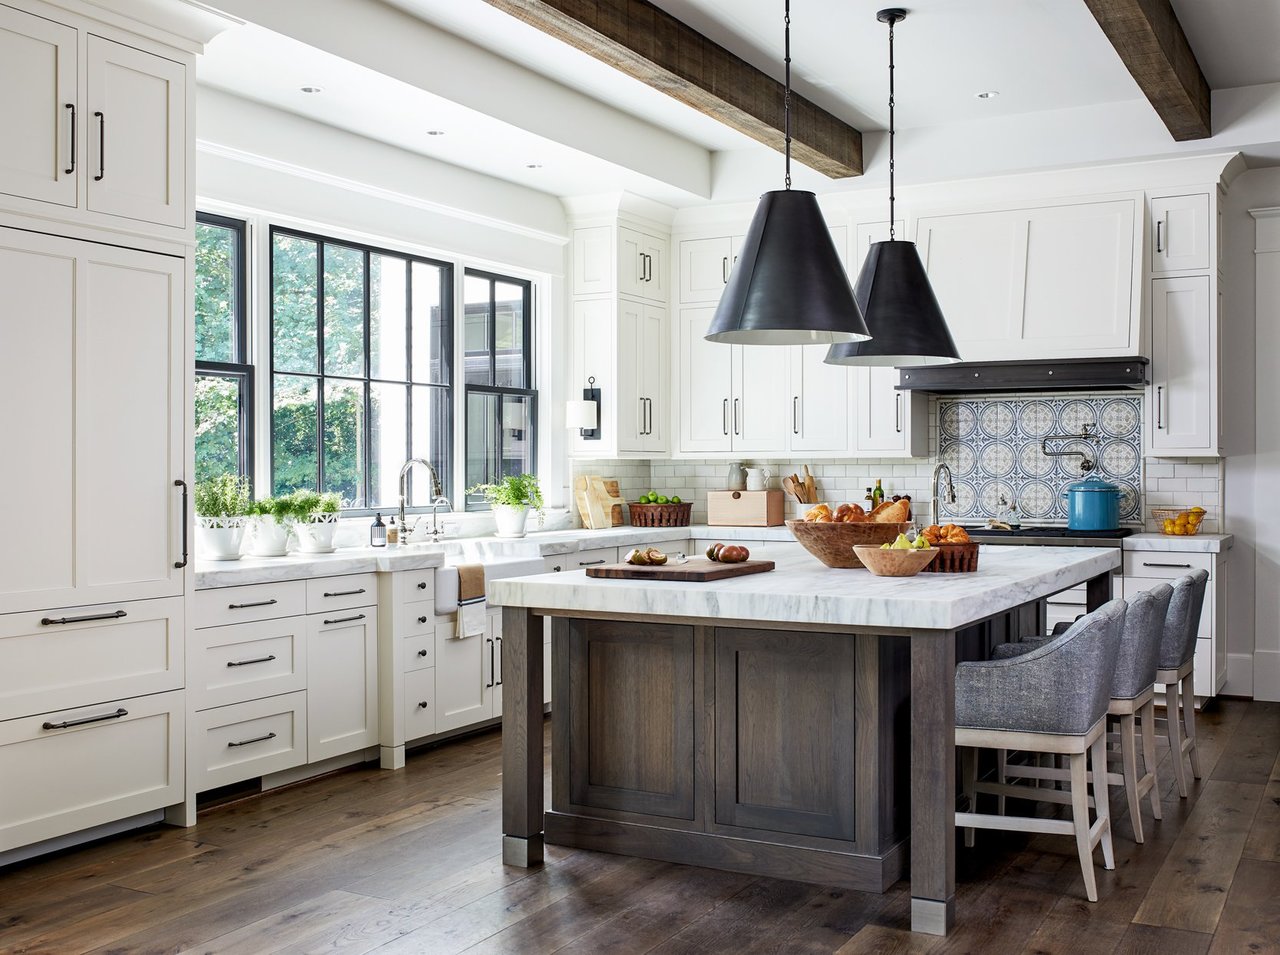 Transitional Style Is the Most Popular Kitchen Design-Here's How to Ace the Look